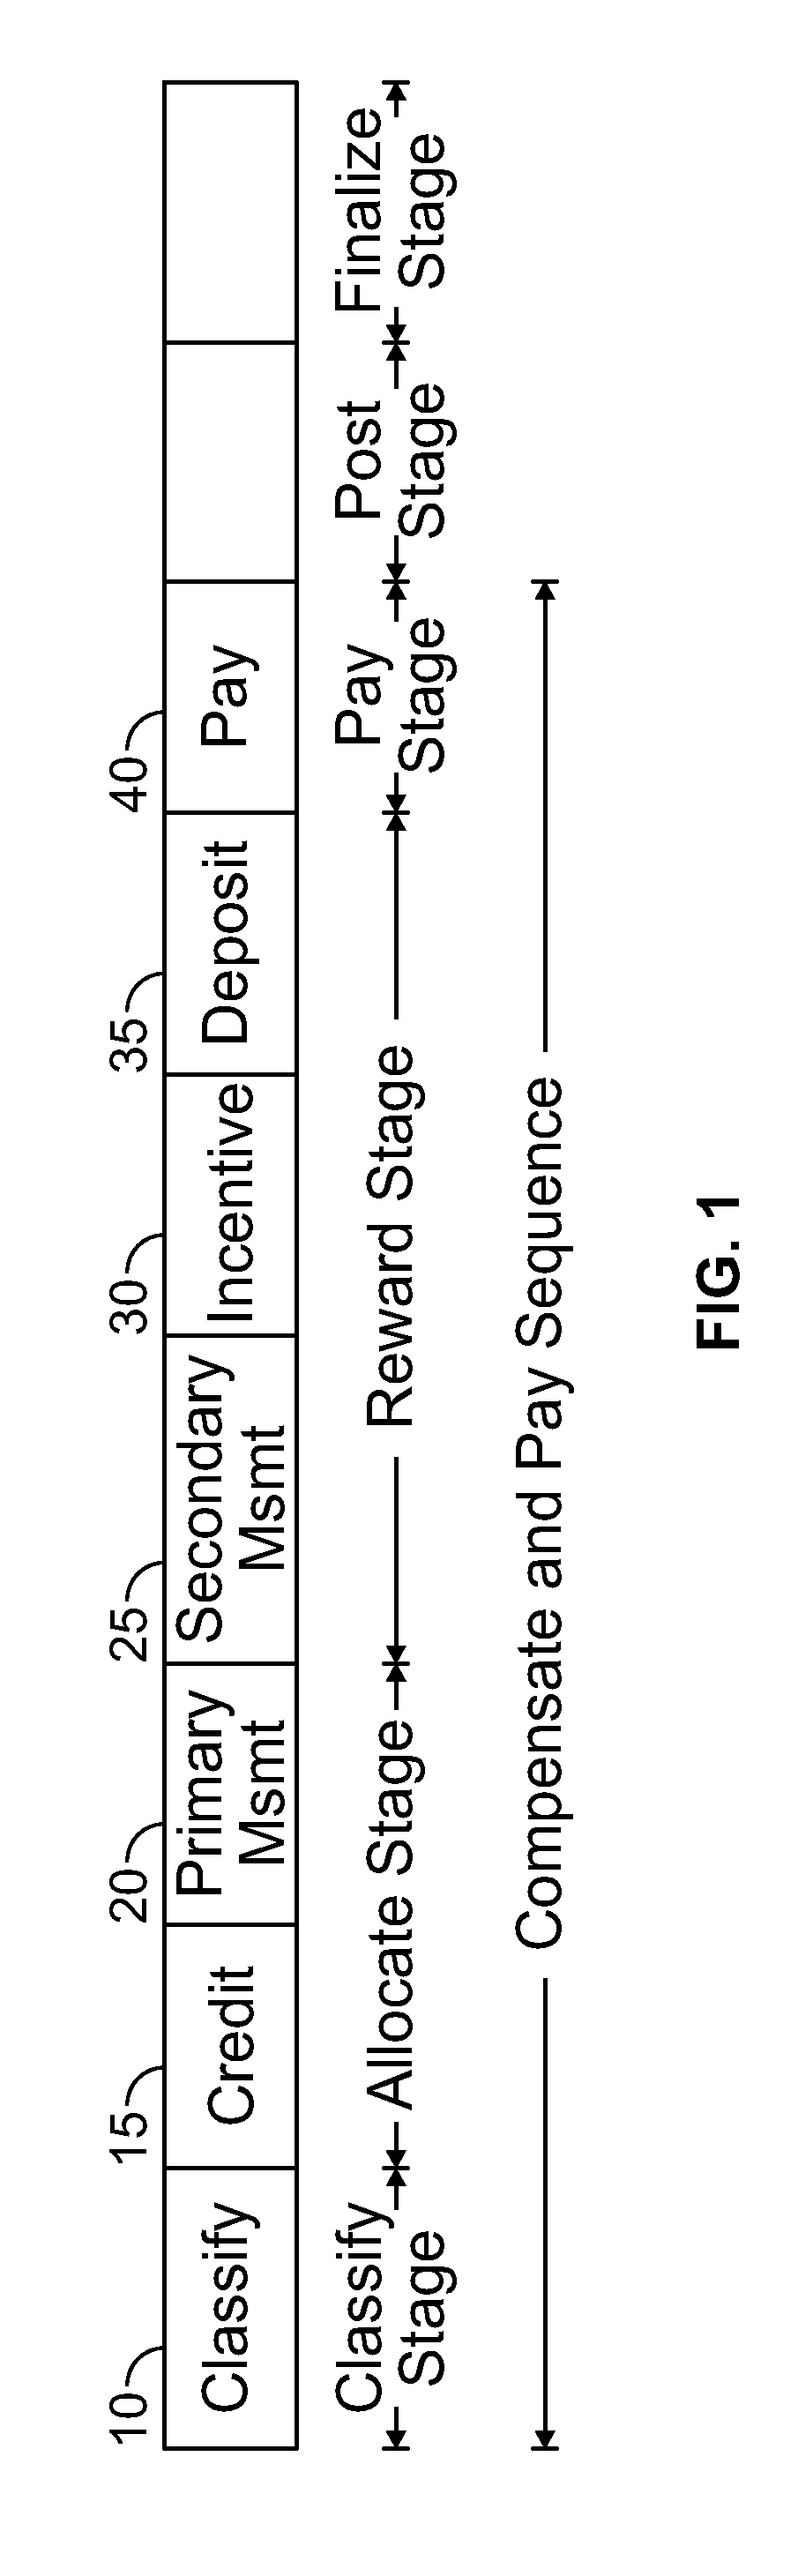 Auto-adjusting worker configuration for grid-based multi-stage, multi-worker computations